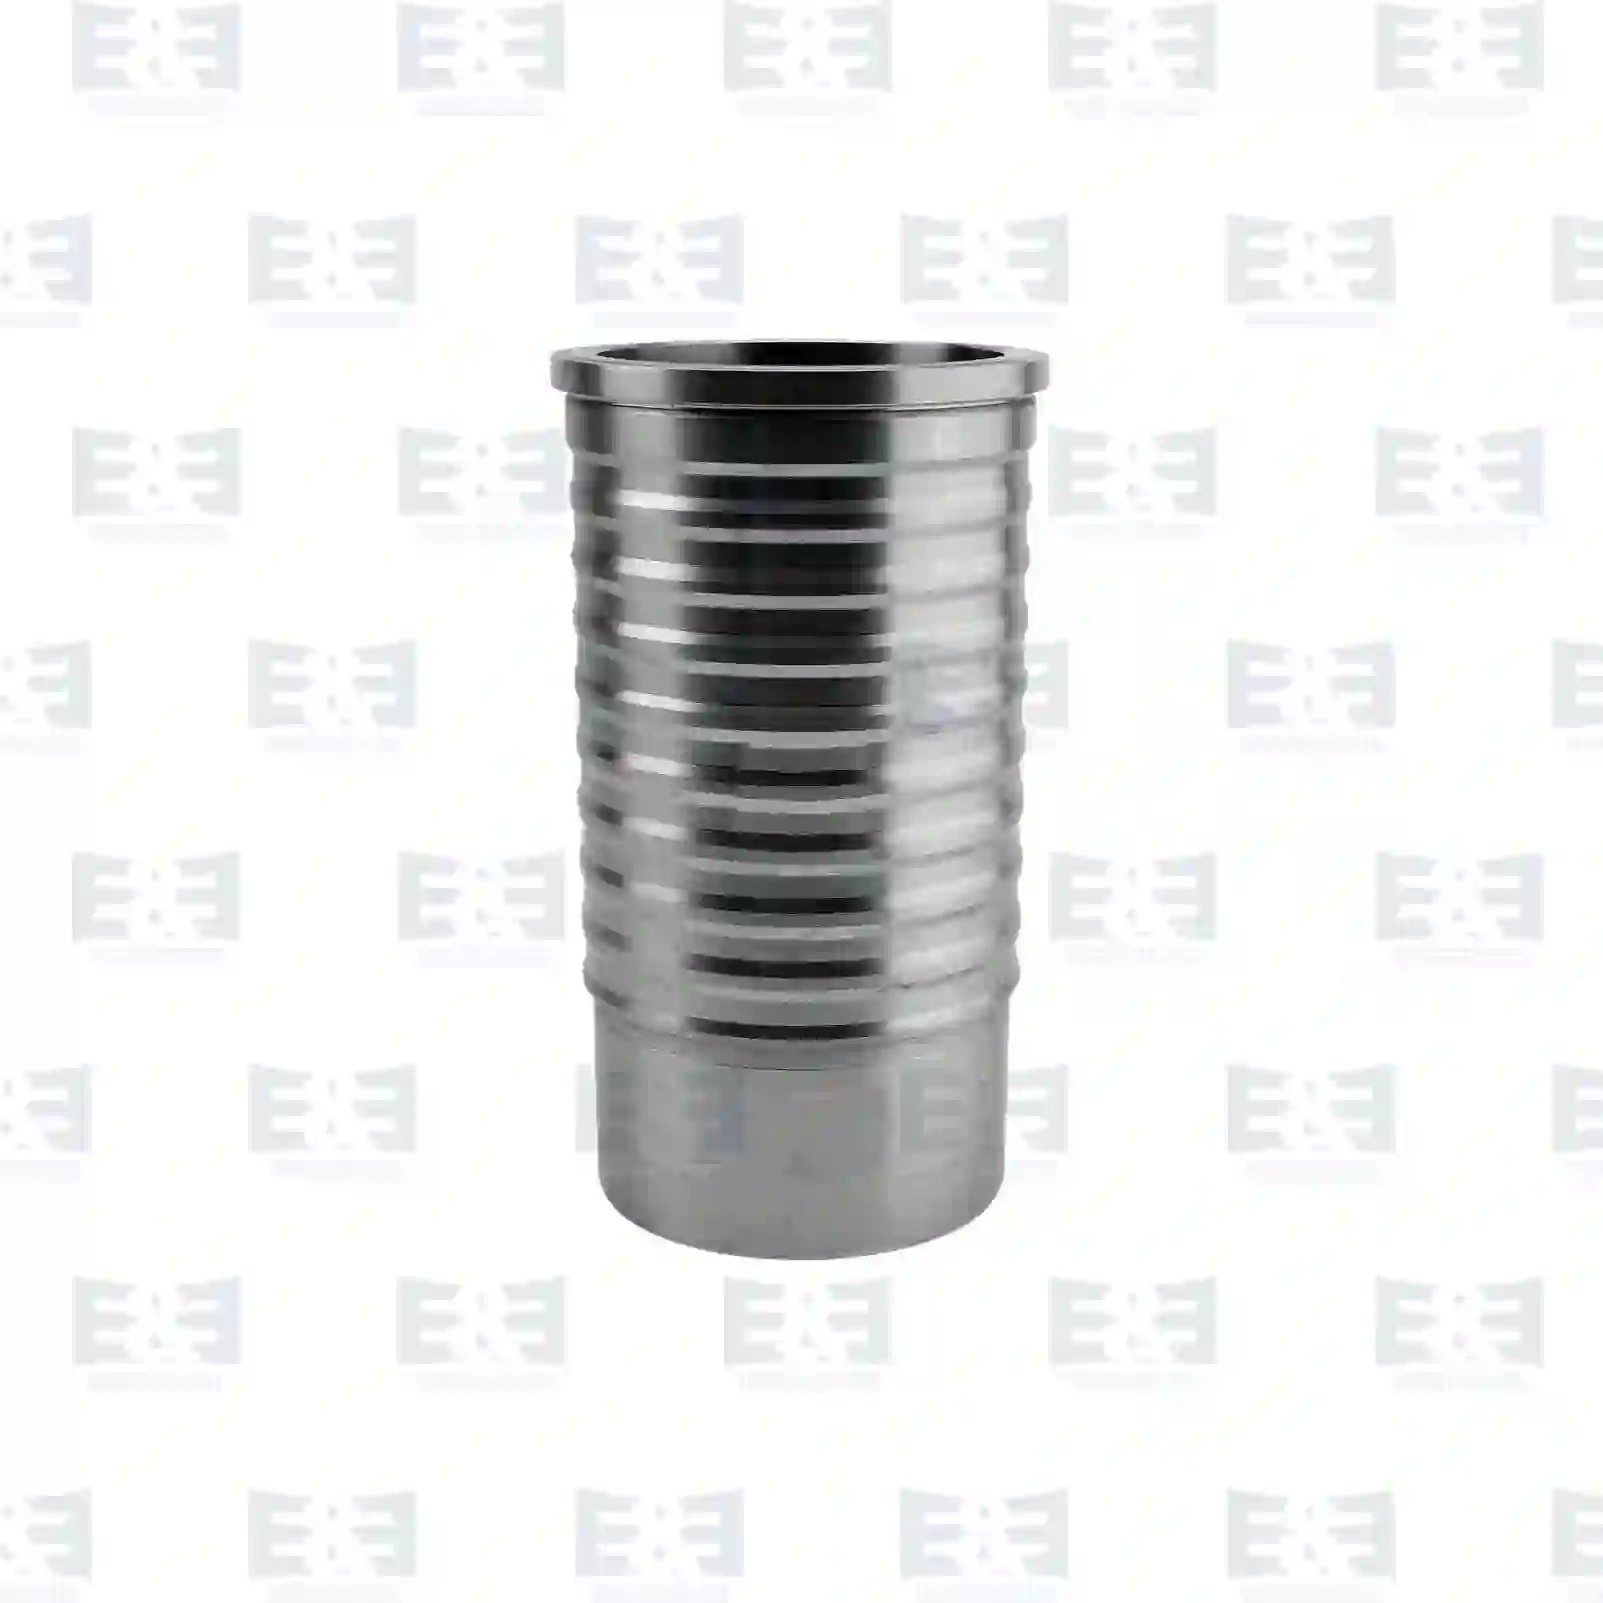 Cylinder liner, without seal rings, 2E2200018, 323601, 374801 ||  2E2200018 E&E Truck Spare Parts | Truck Spare Parts, Auotomotive Spare Parts Cylinder liner, without seal rings, 2E2200018, 323601, 374801 ||  2E2200018 E&E Truck Spare Parts | Truck Spare Parts, Auotomotive Spare Parts